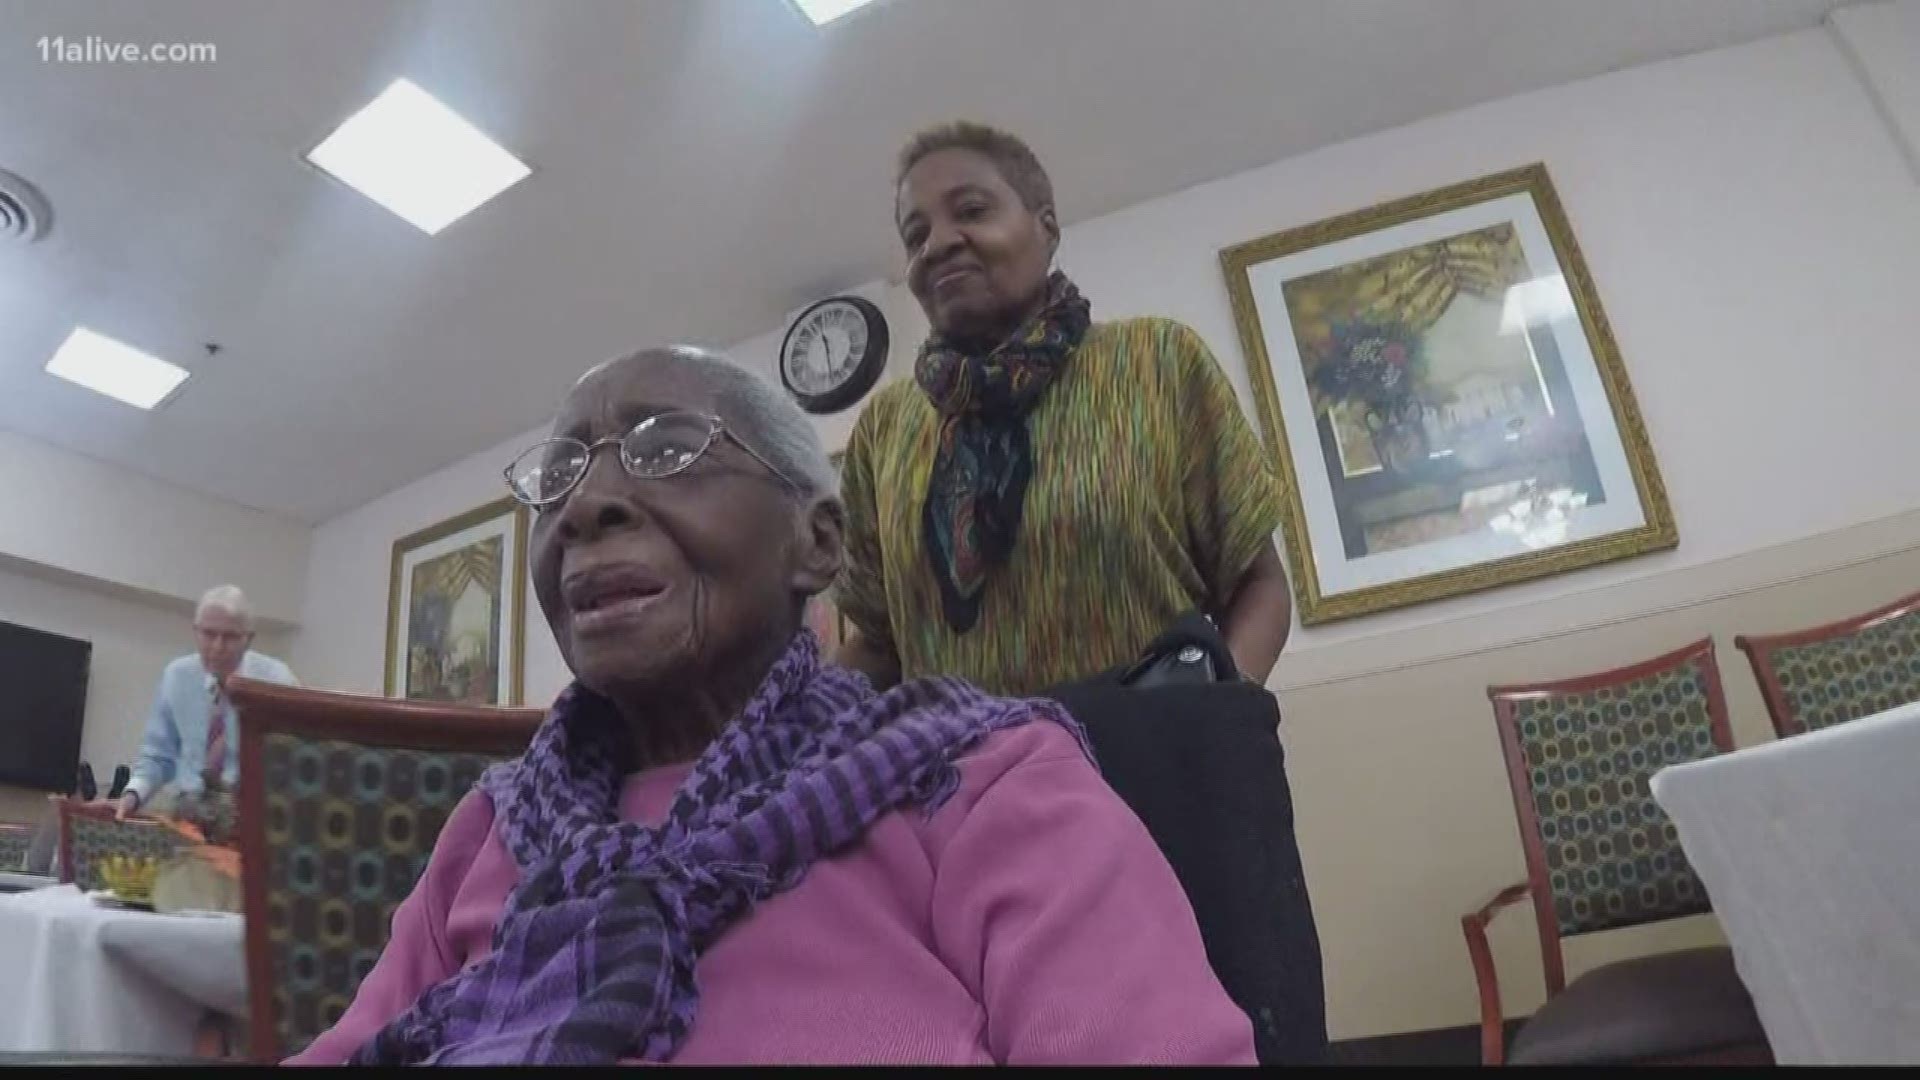 In her tiny dinette in Southwest Atlanta, Leila Williams prepared meals for more than 40 years. Her longtime patrons included leaders of the Civil Rights Movement.